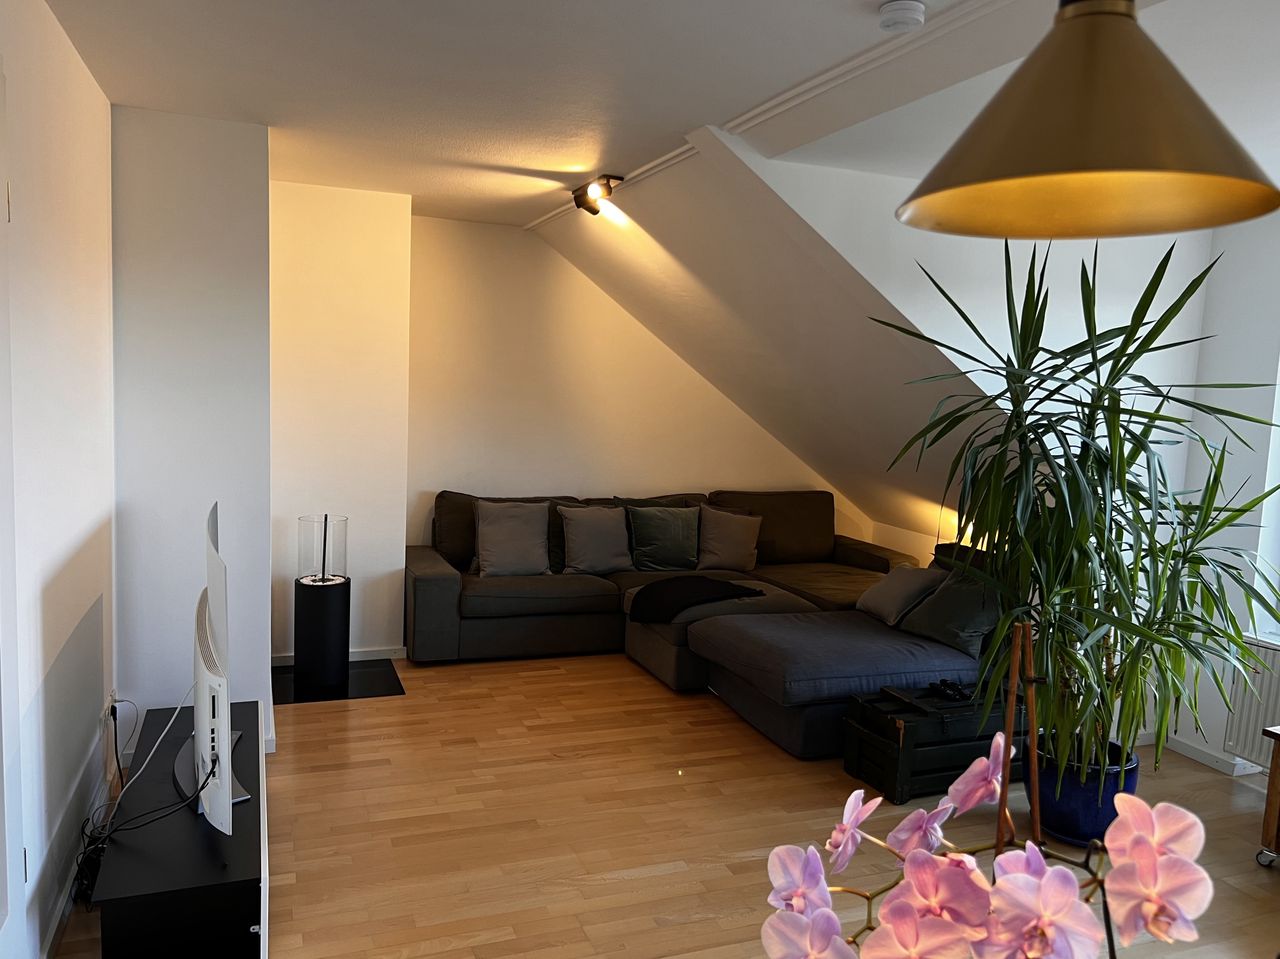 Cozy & charming loft in Munich with south-facing terrace incl. Garage parking